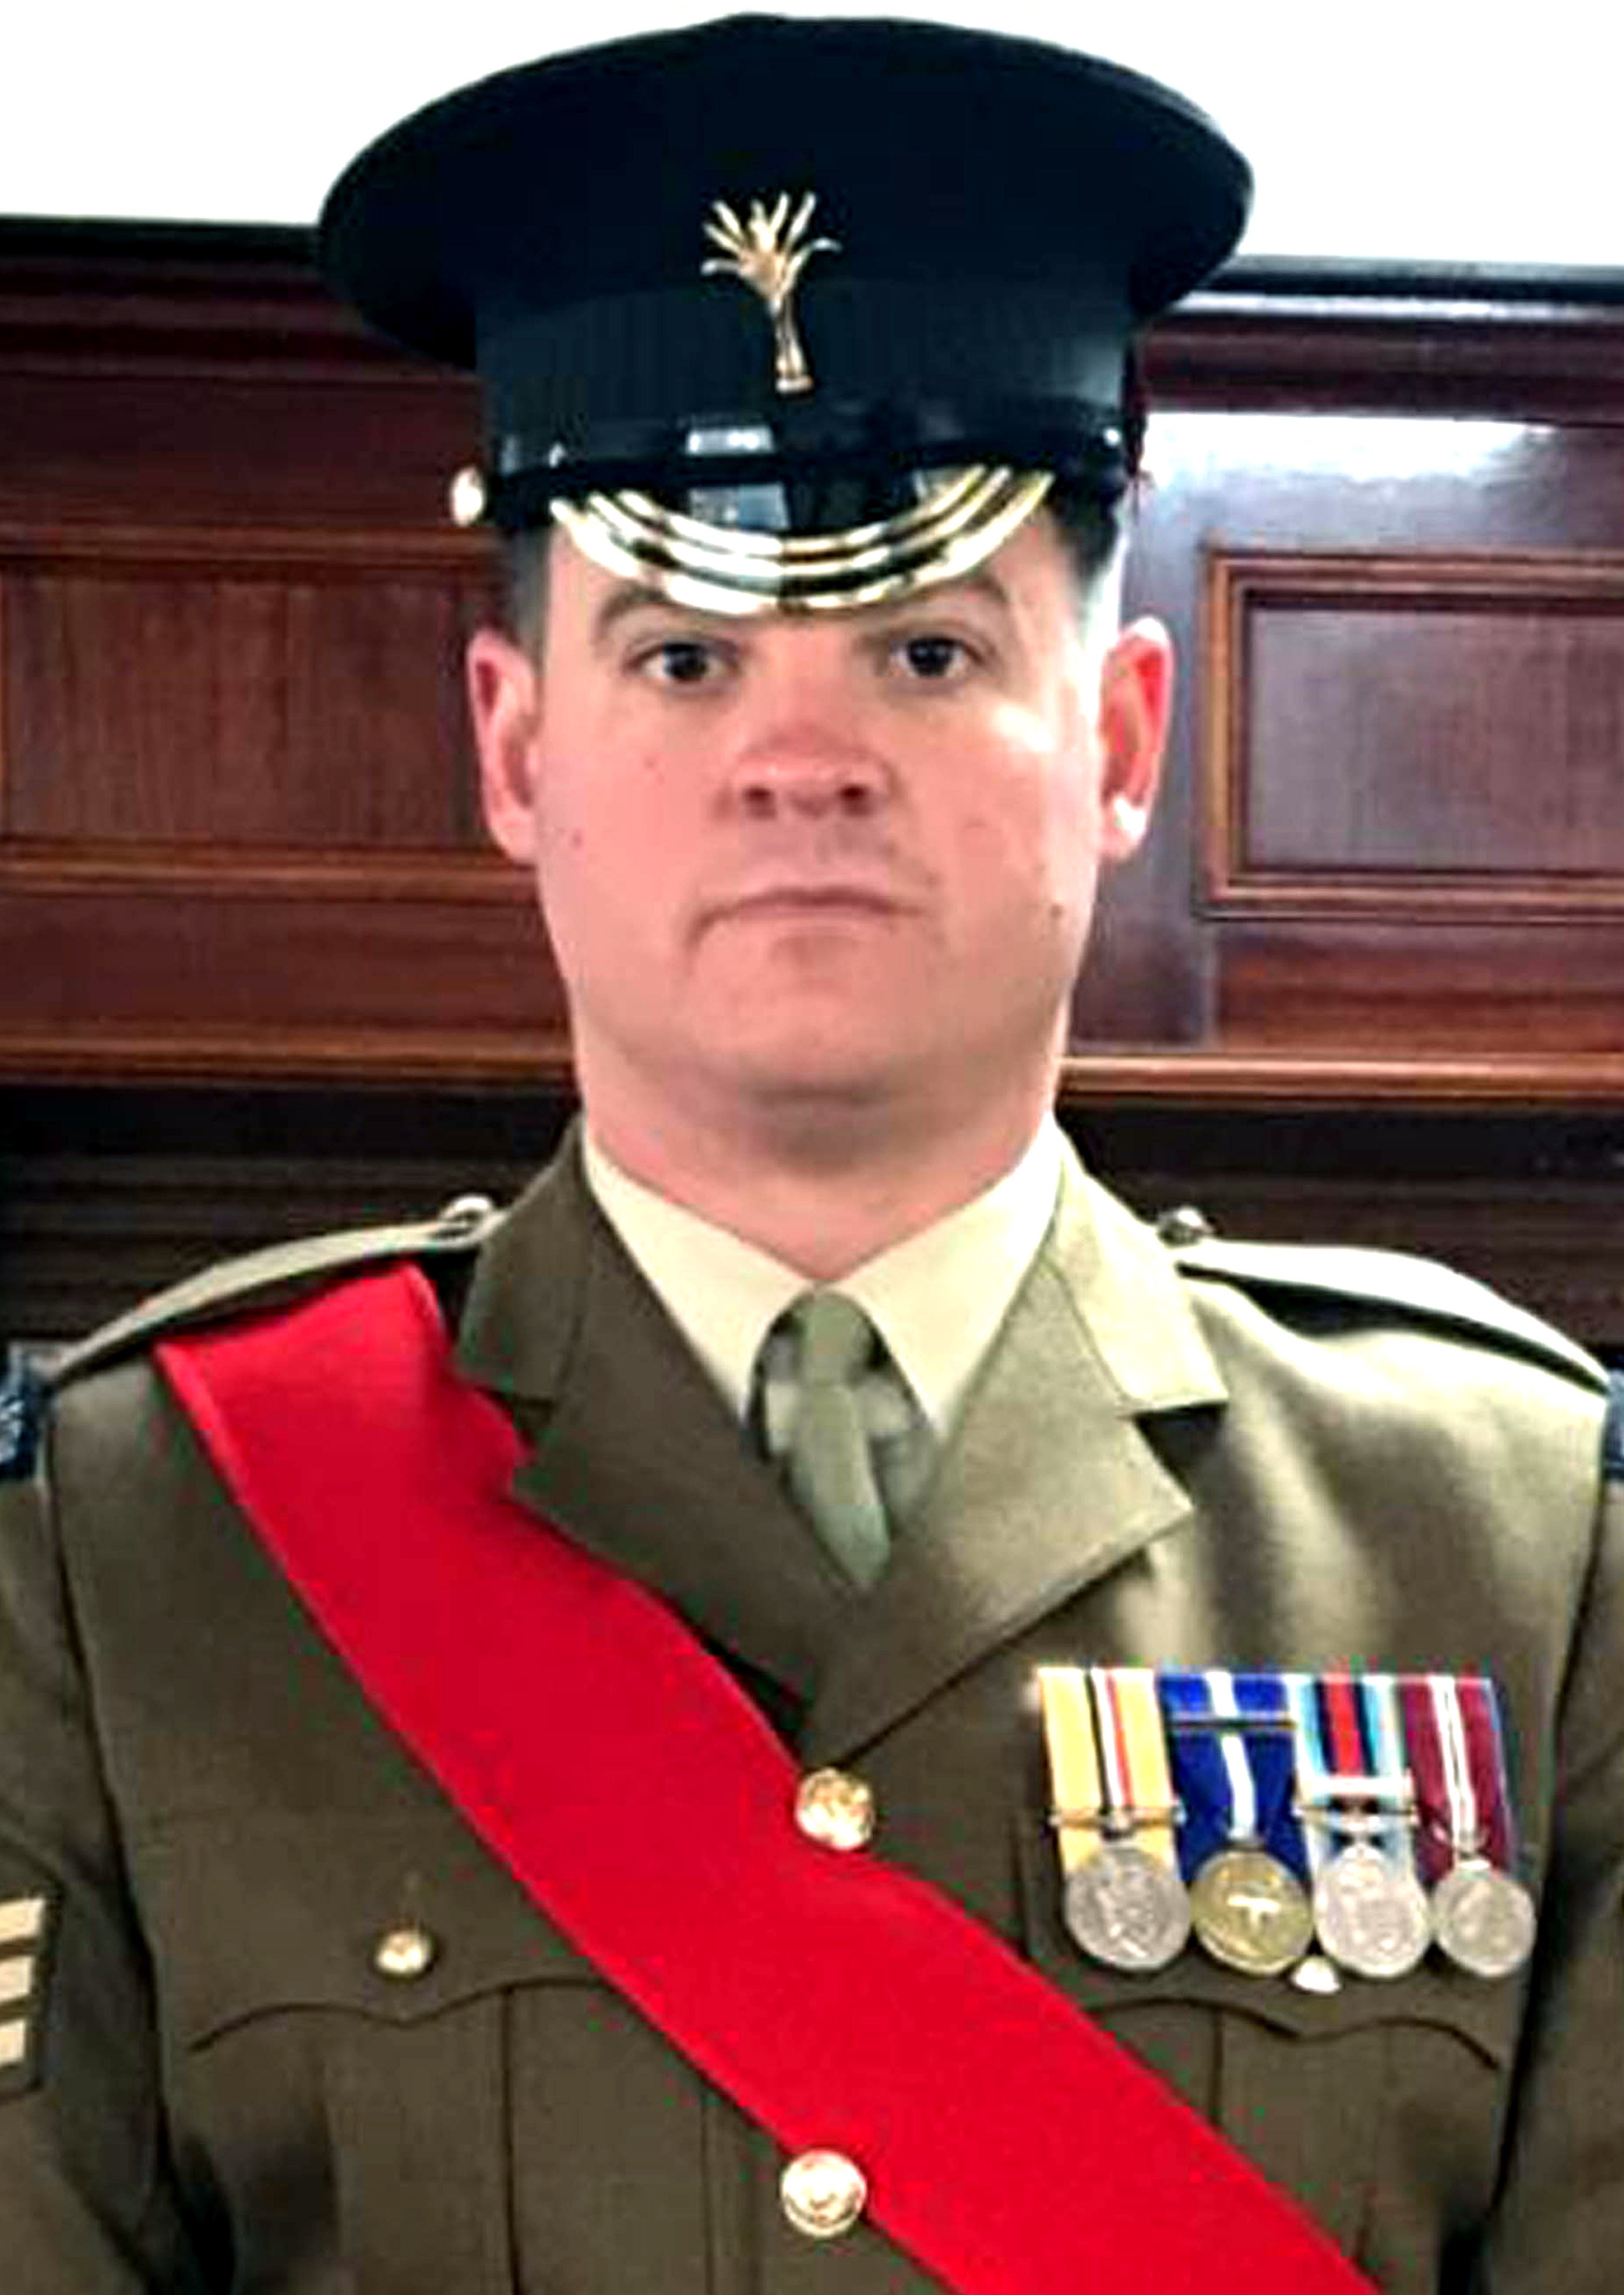 Sergeant Gavin Hillier, 35, from the 1st Battalion Welsh Guards, was fatally injured during a training exercise at the Castlemartin range in Pembrokeshire